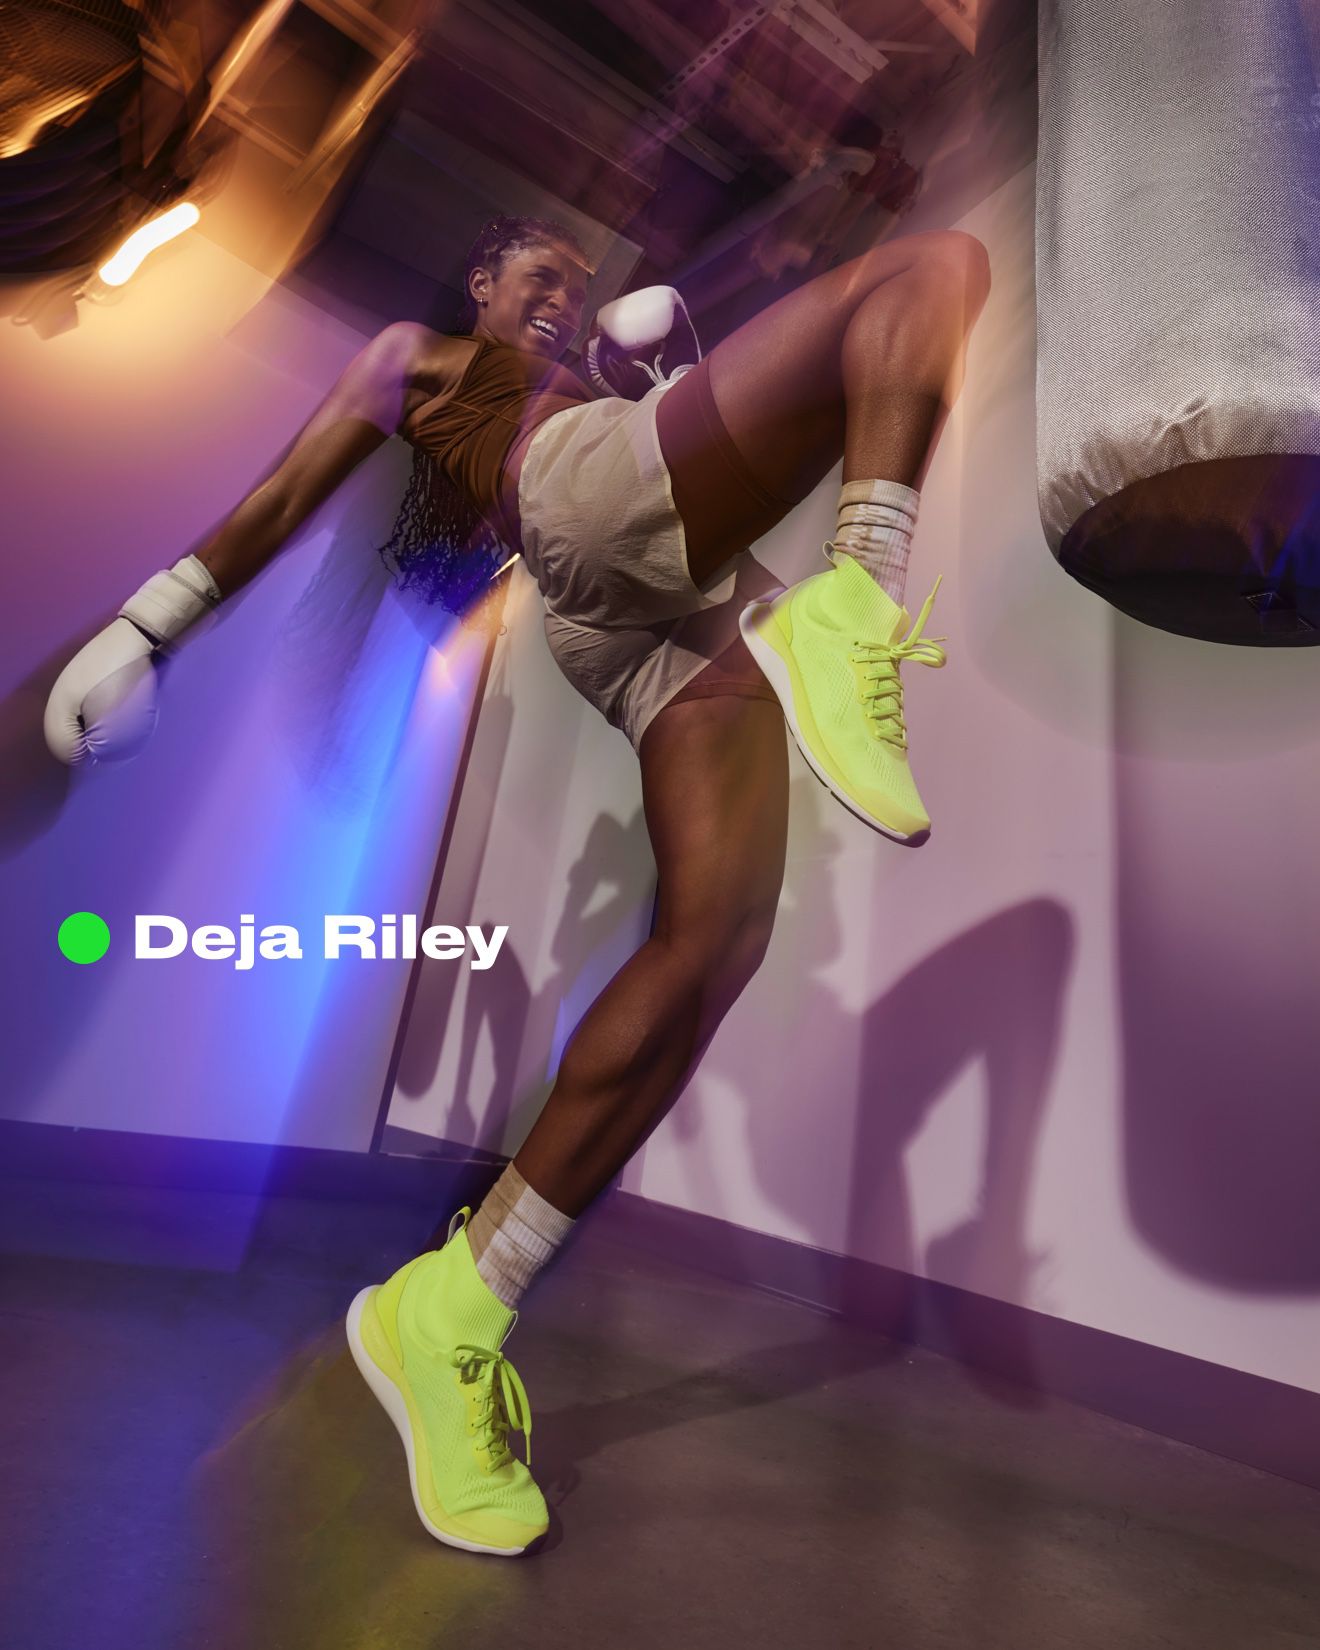 Deja Riley, lululemon ambassador, boxing in the new chargefeel mid—in Highlight Yellow.